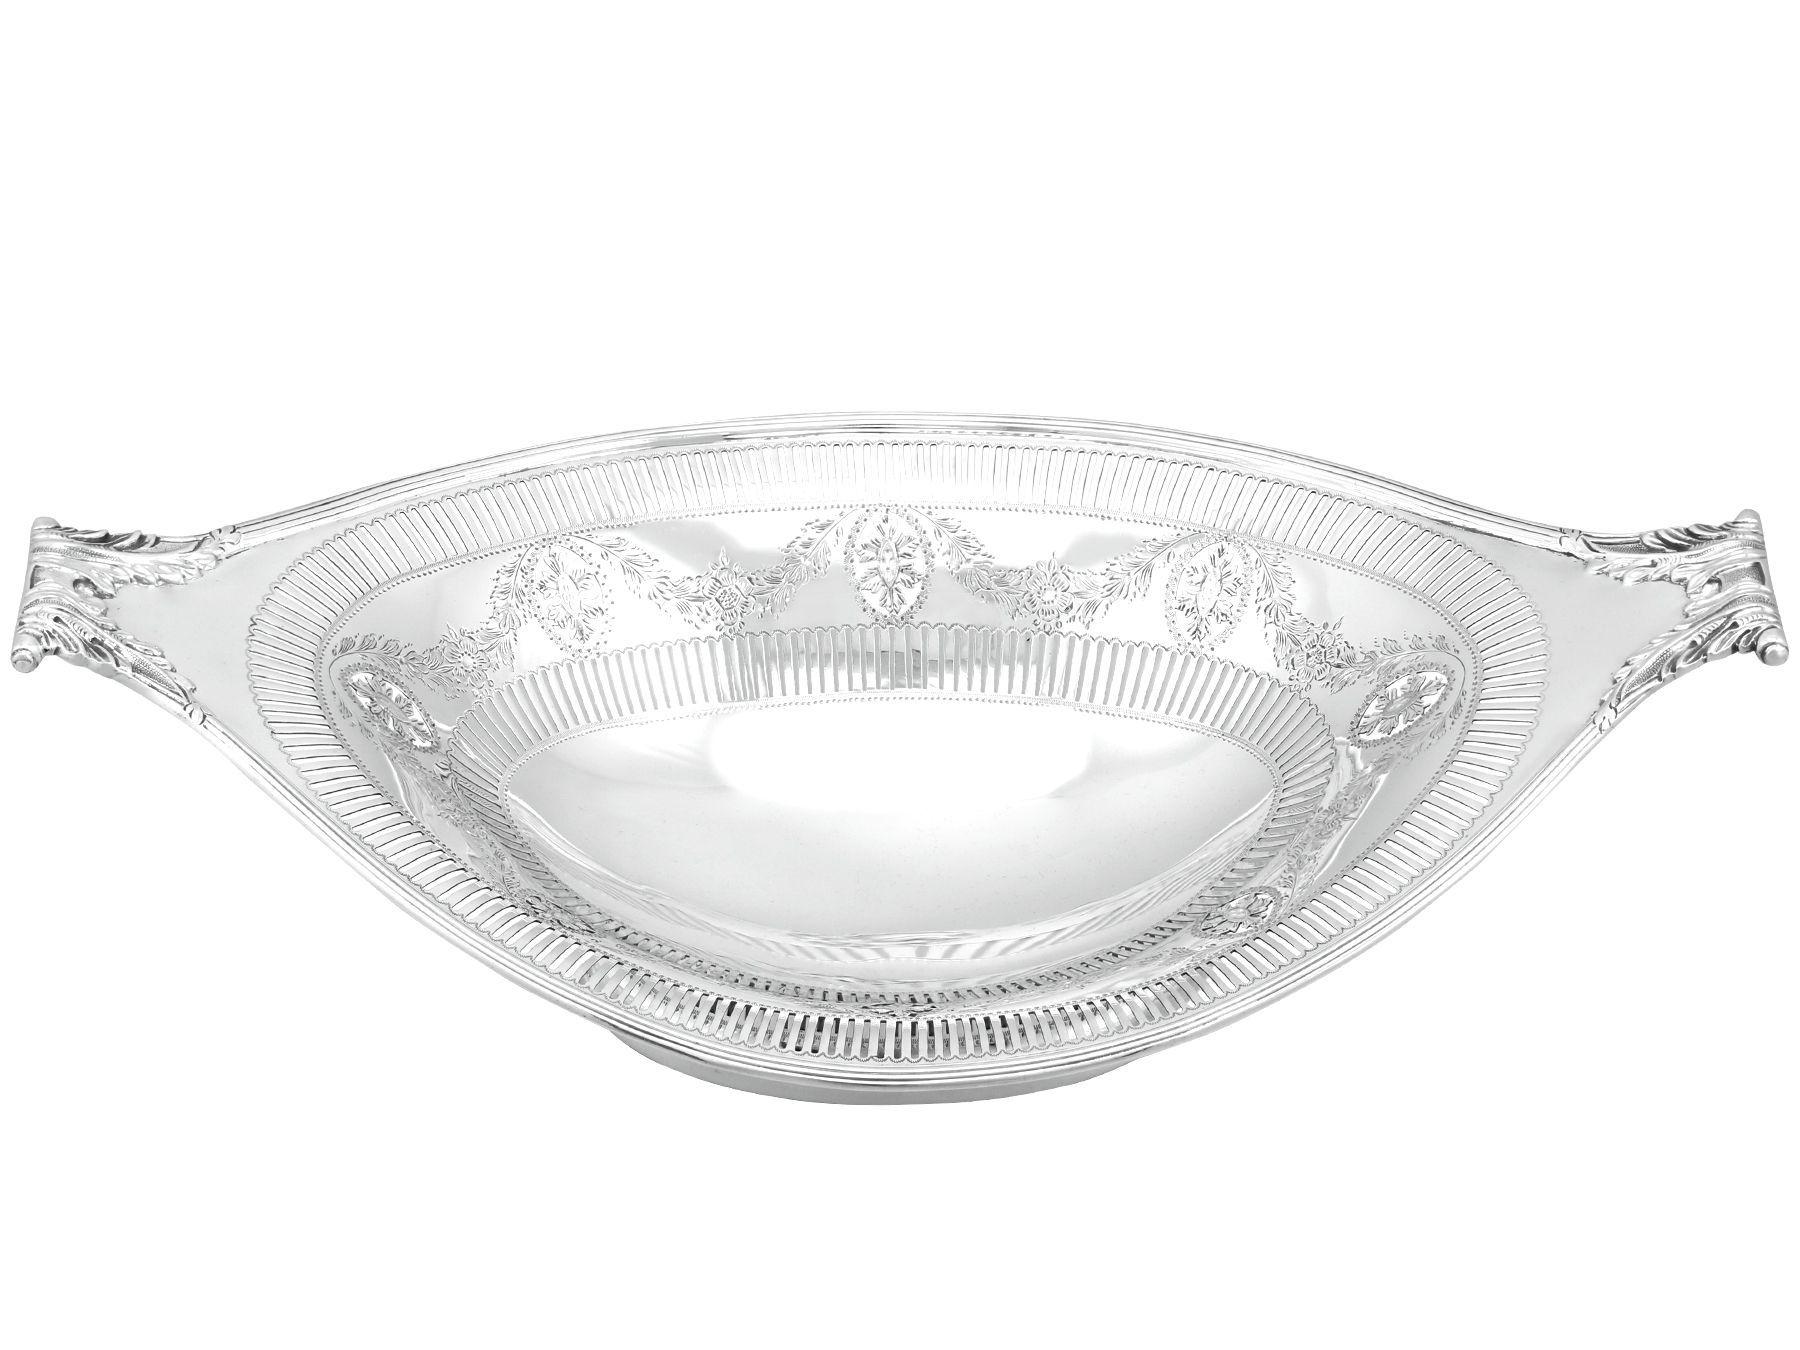 An exceptional, fine and impressive antique George V English sterling silver bread dish; an addition to our dining silverware collection.

This exceptional antique George V sterling silver dish has a plain oval boat shaped form.

The body of